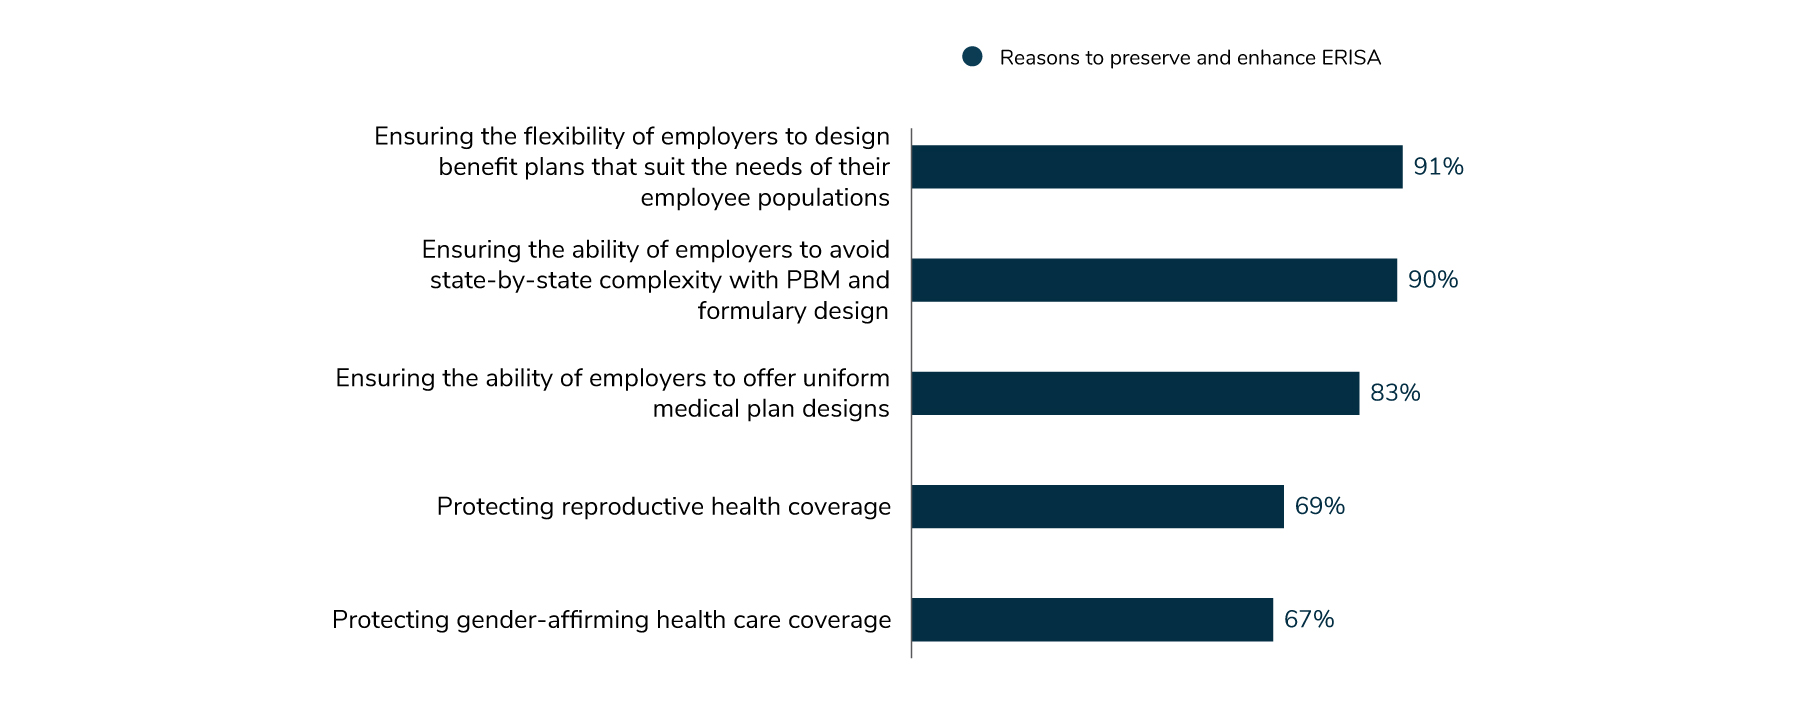 Employers believe that ERISA preemption needs to be preserved and enhanced to ensure the flexibility of employers to design benefit plans that suit their employee populations (91%), to ensure the ability of employers to avoid state-by-state complexity (90%), to ensure the ability of employers to offer uniform medical plan designs (83%), to protect reproductive health coverage (69%), and to protect gender-affirming health care coverage (67%). 